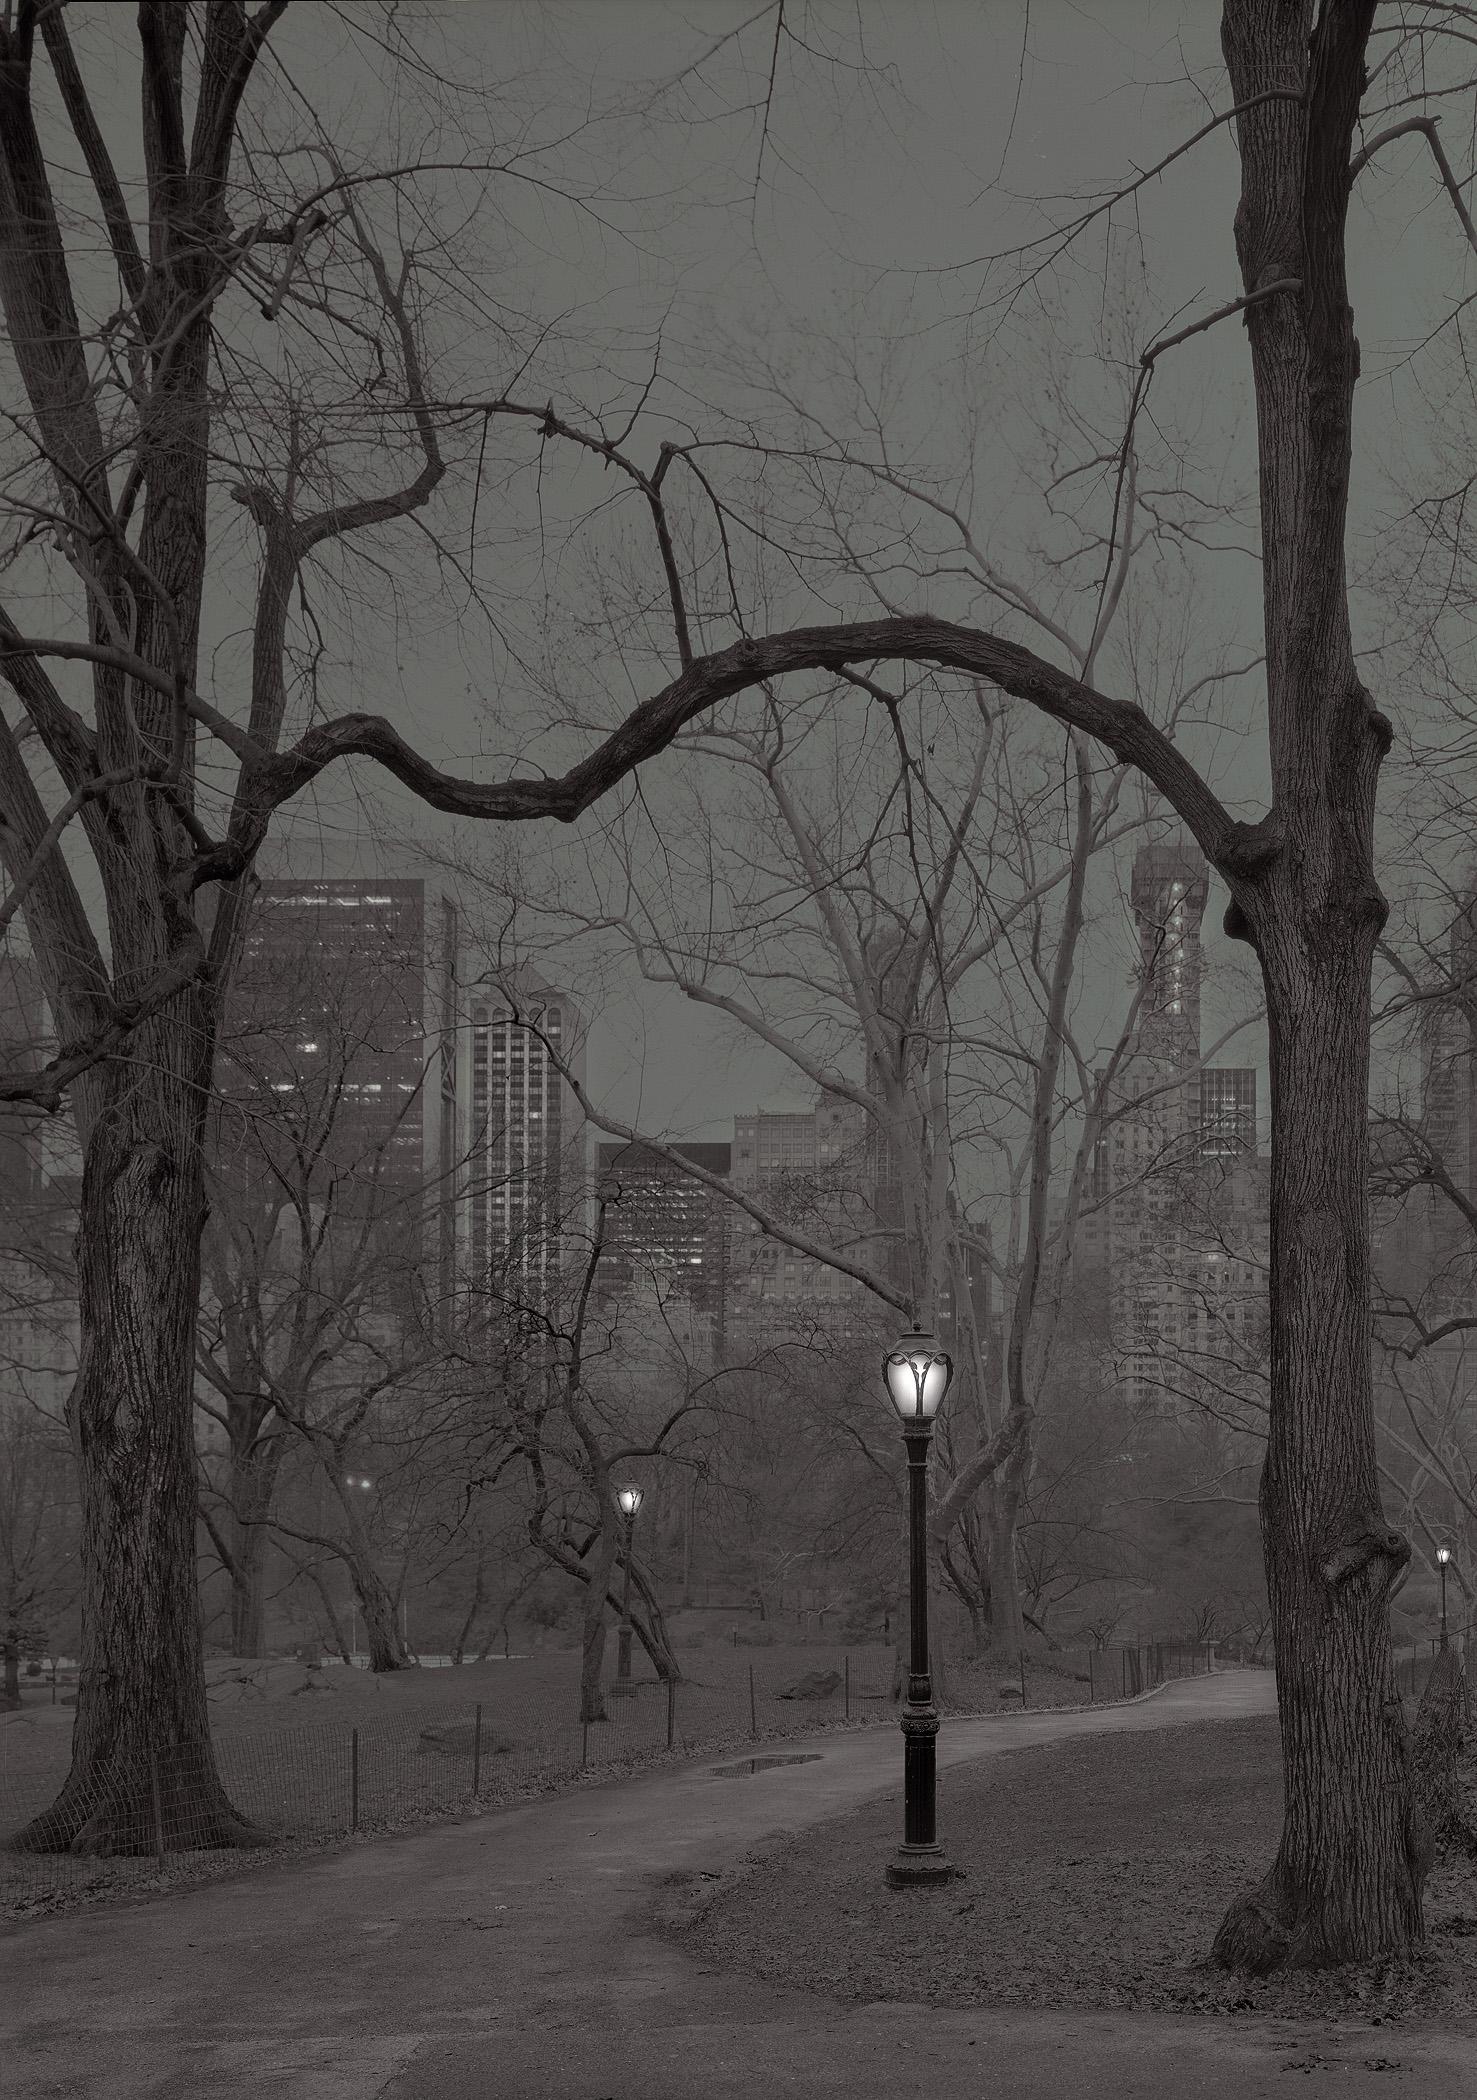 Michael Massaia, Central Park, New York City, 23rd Hour, Looking South, 2018, Image size approx: 28 x 22", Selenium and gold toned gelatin silver print mounted to archival museum board and matted, Edition of 20, Signed and editioned on print recto.